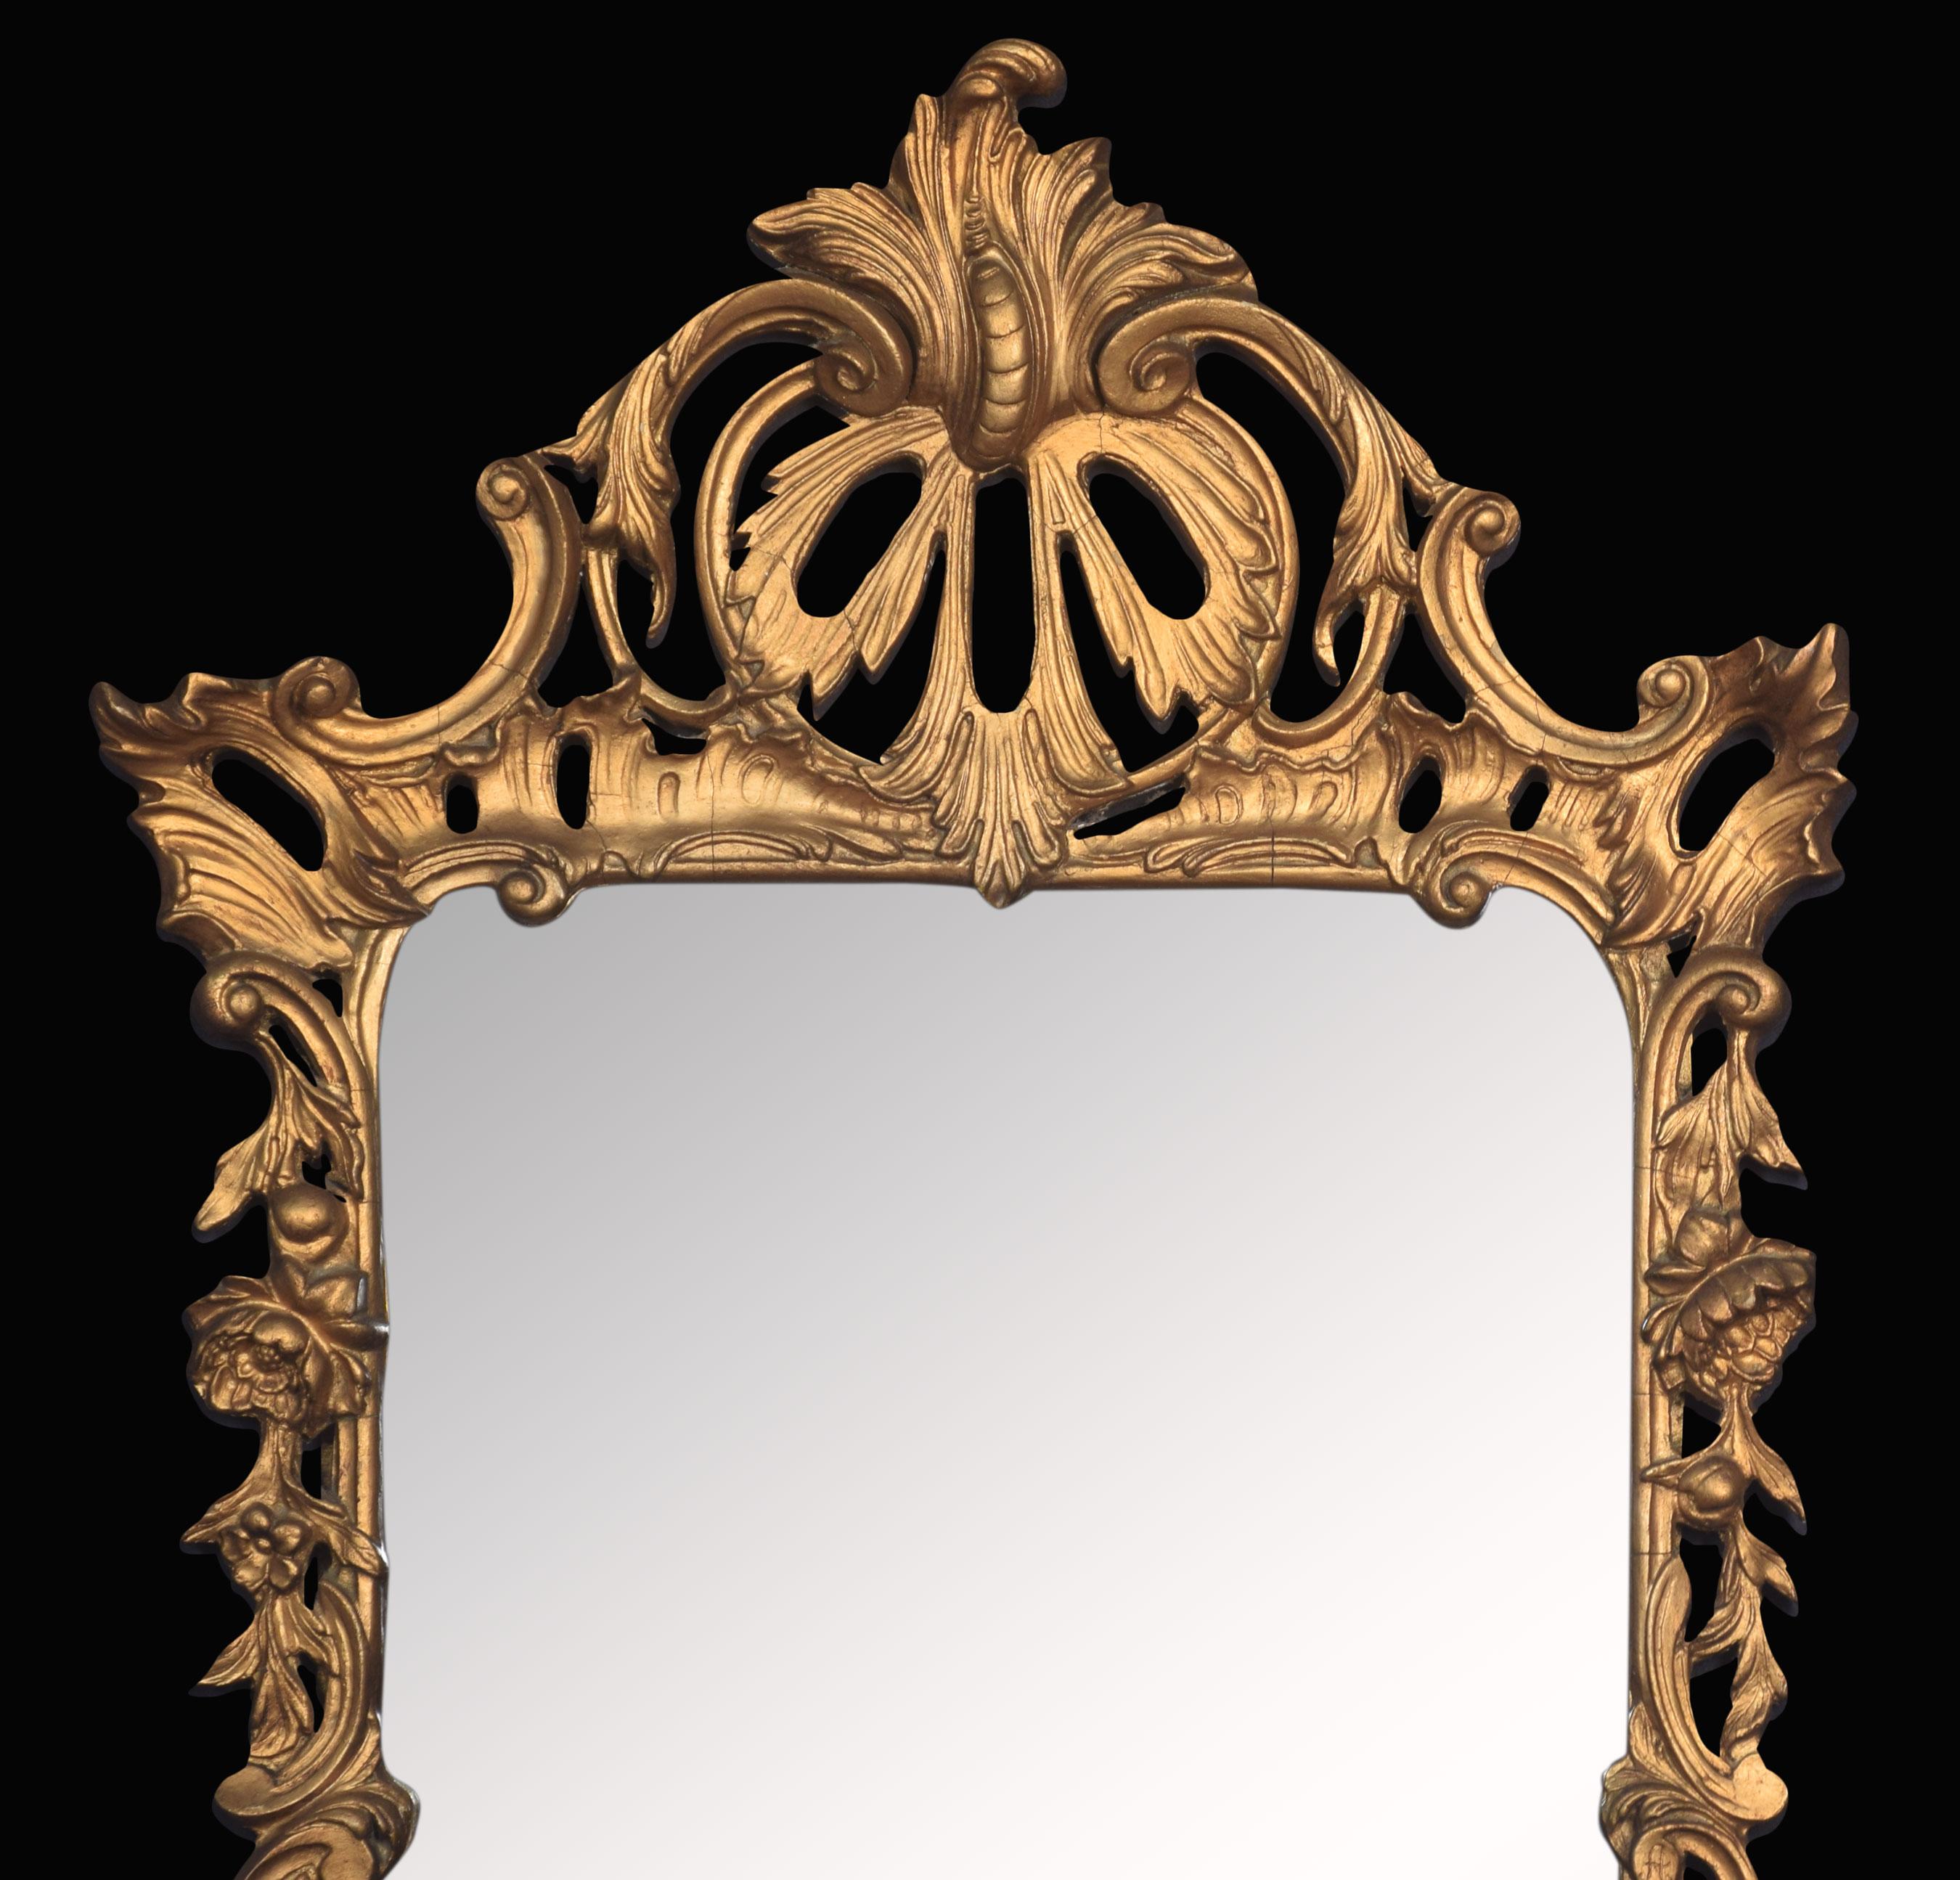 Rococo Revival gilt wall mirror. The original rectangular mirror plate surrounded by giltwood C scroll acanthus and floral frame.
Dimensions:
Height 34.5 inches
Width 19.5 inches
Depth 2.5 inches.